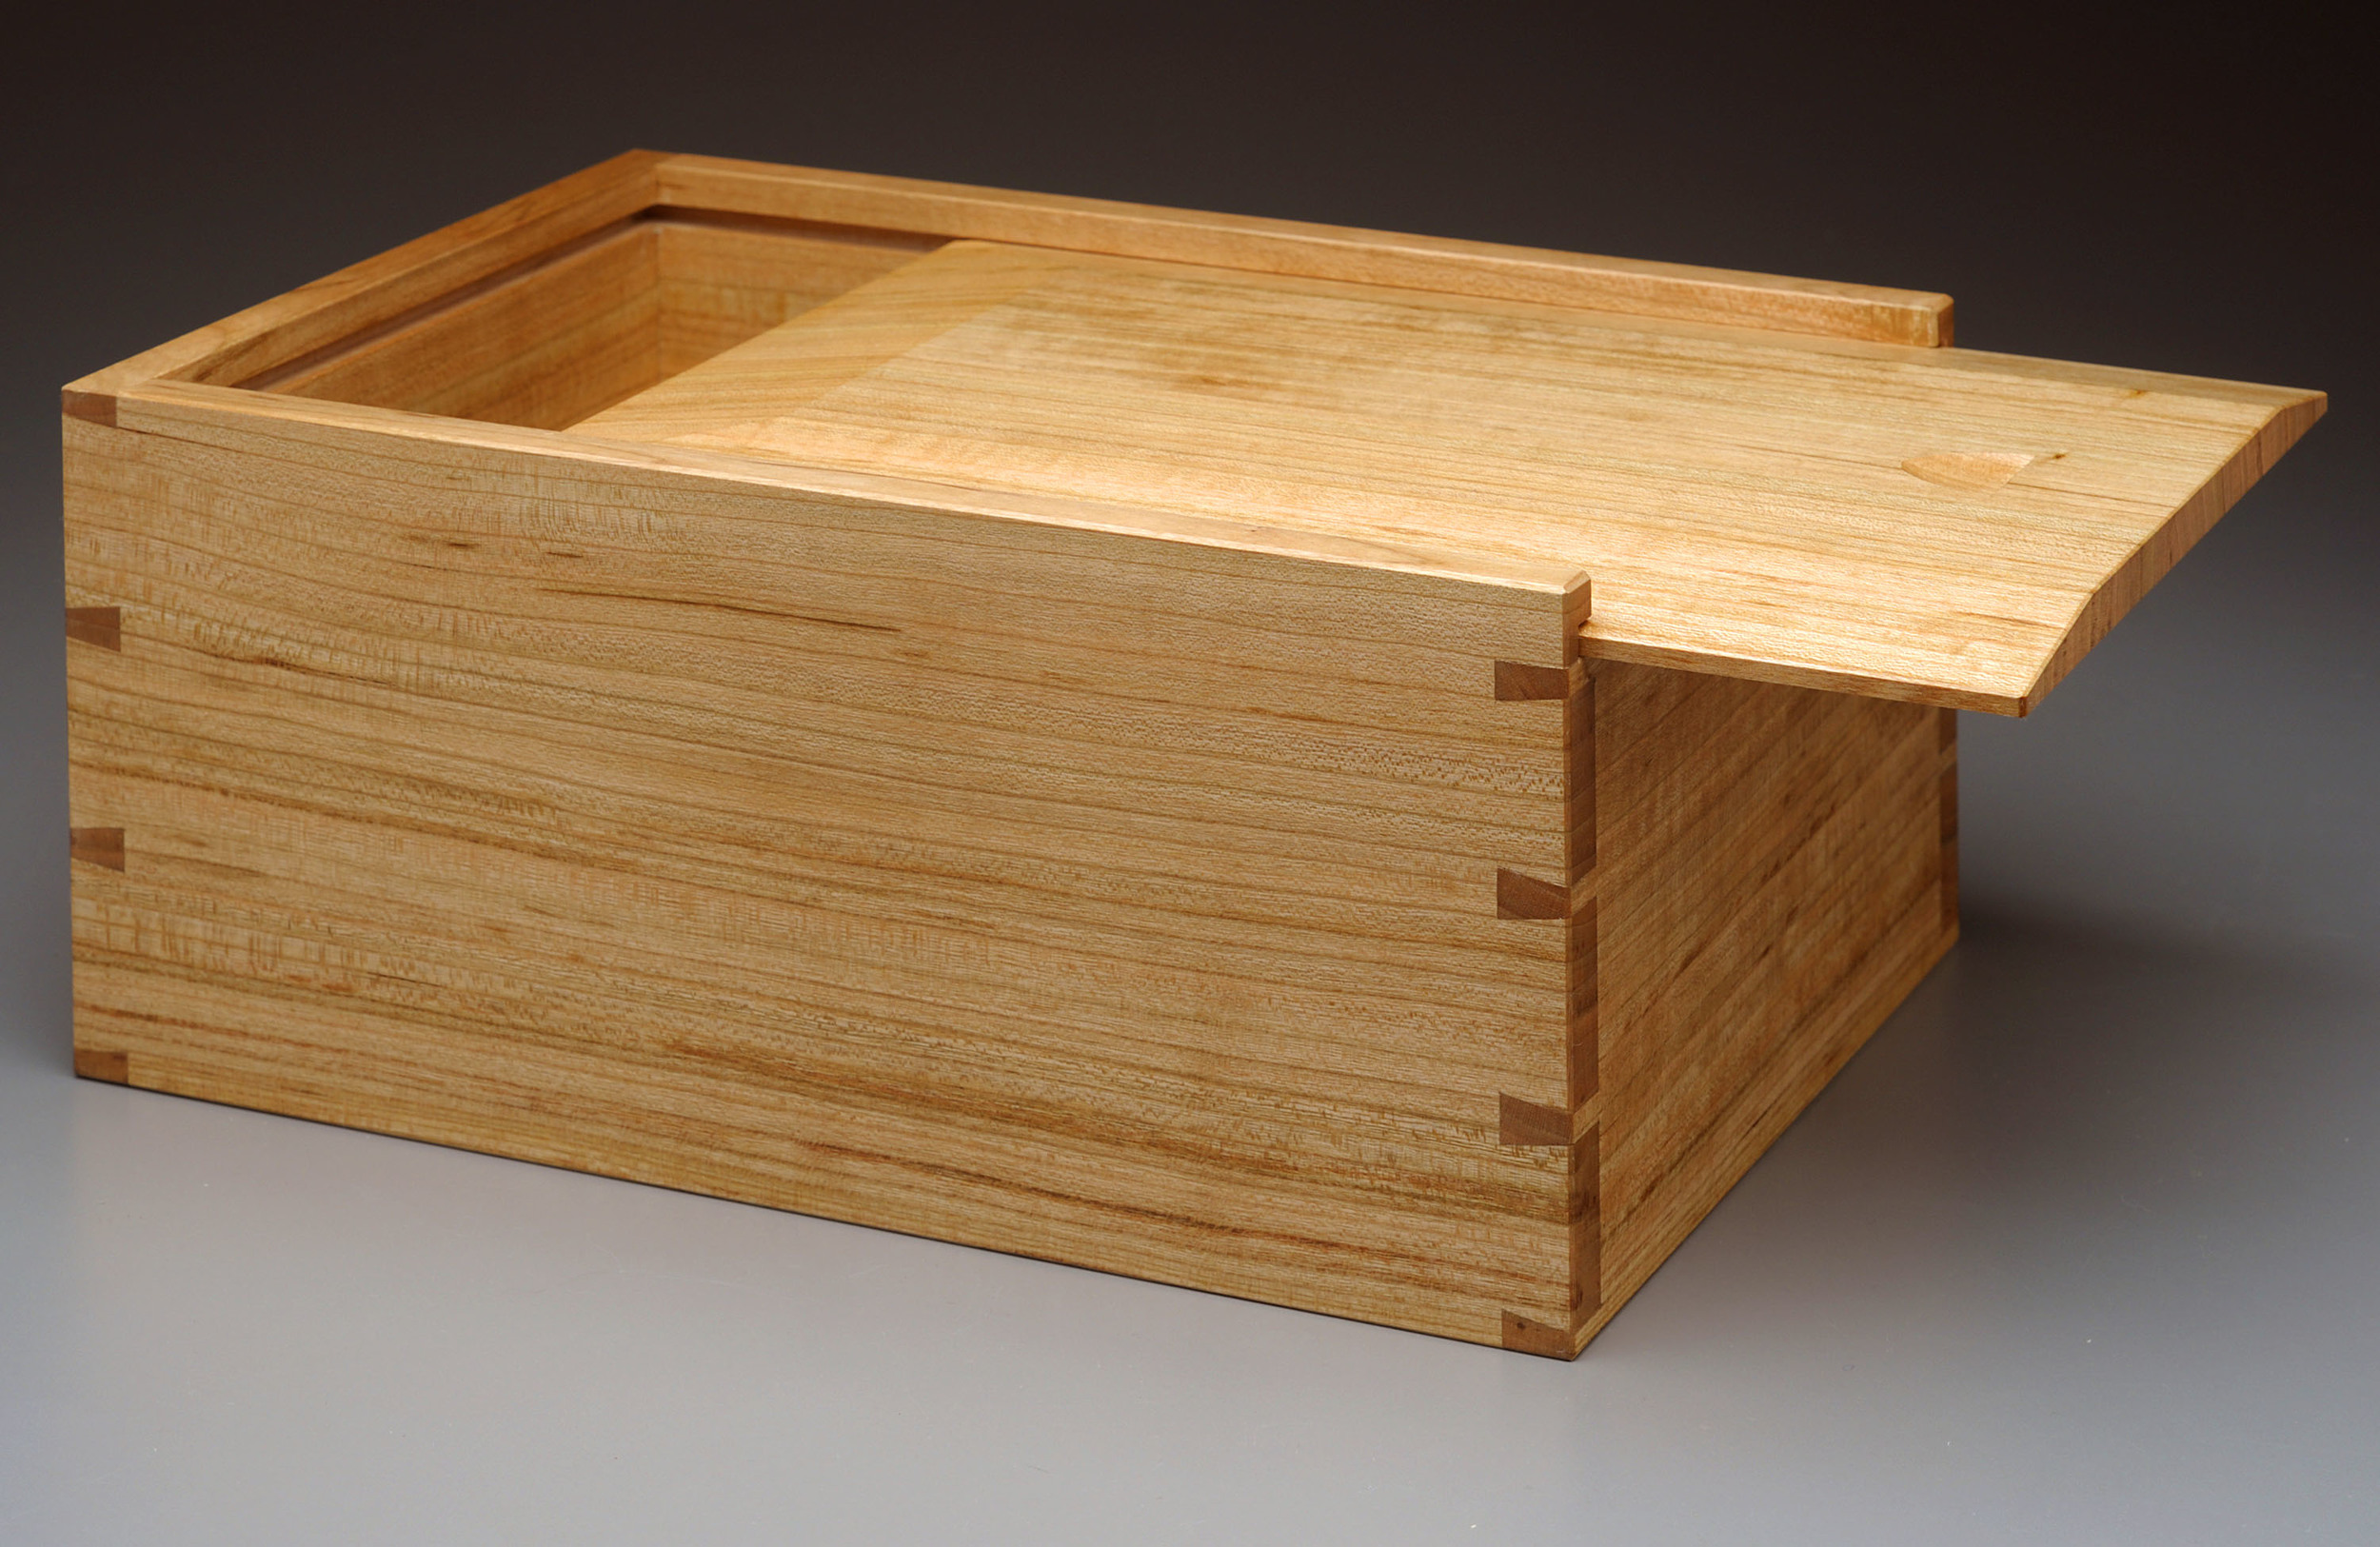  Jen's Keepsake Box  Inspired by candle boxes made by the Shakers, this keepsake box is made of quartersawn cherry, with a white pine bottom. The through dovetails are hand-cut, and the sliding lid is shaped by hand. The original, shown here, was a w